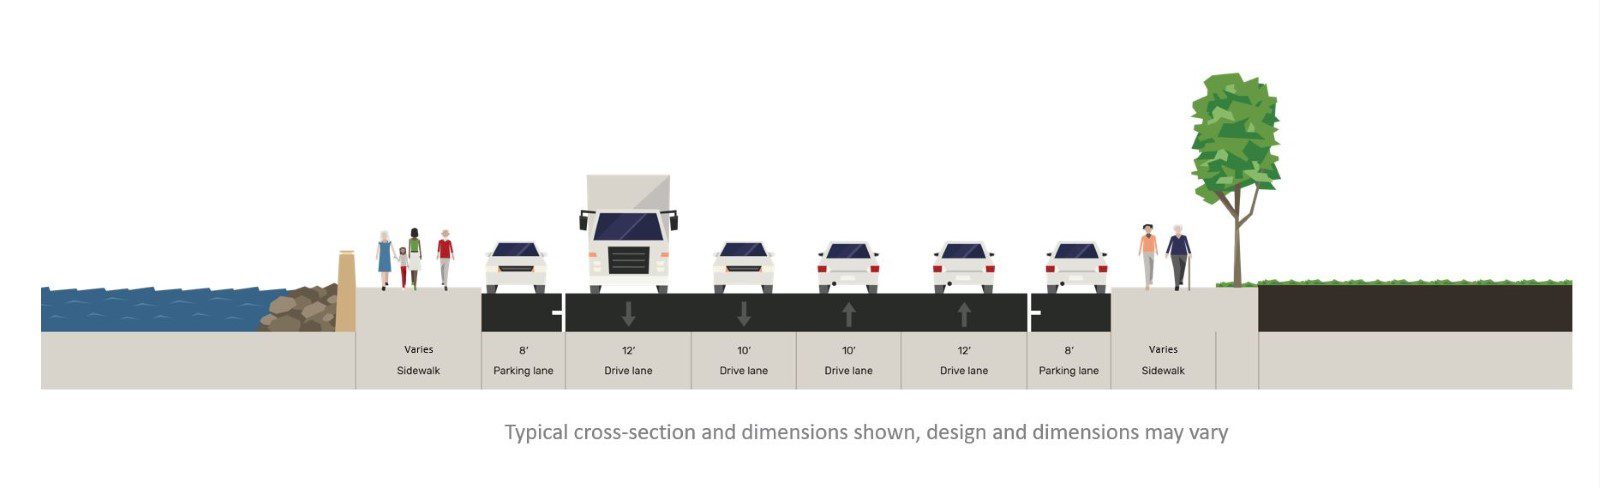 A graphic showing a cross section of the street level view of existing Alaskan Way conditions, with pedestrian walkways and parking on either side of the street plus 4 drive lanes in the middle.